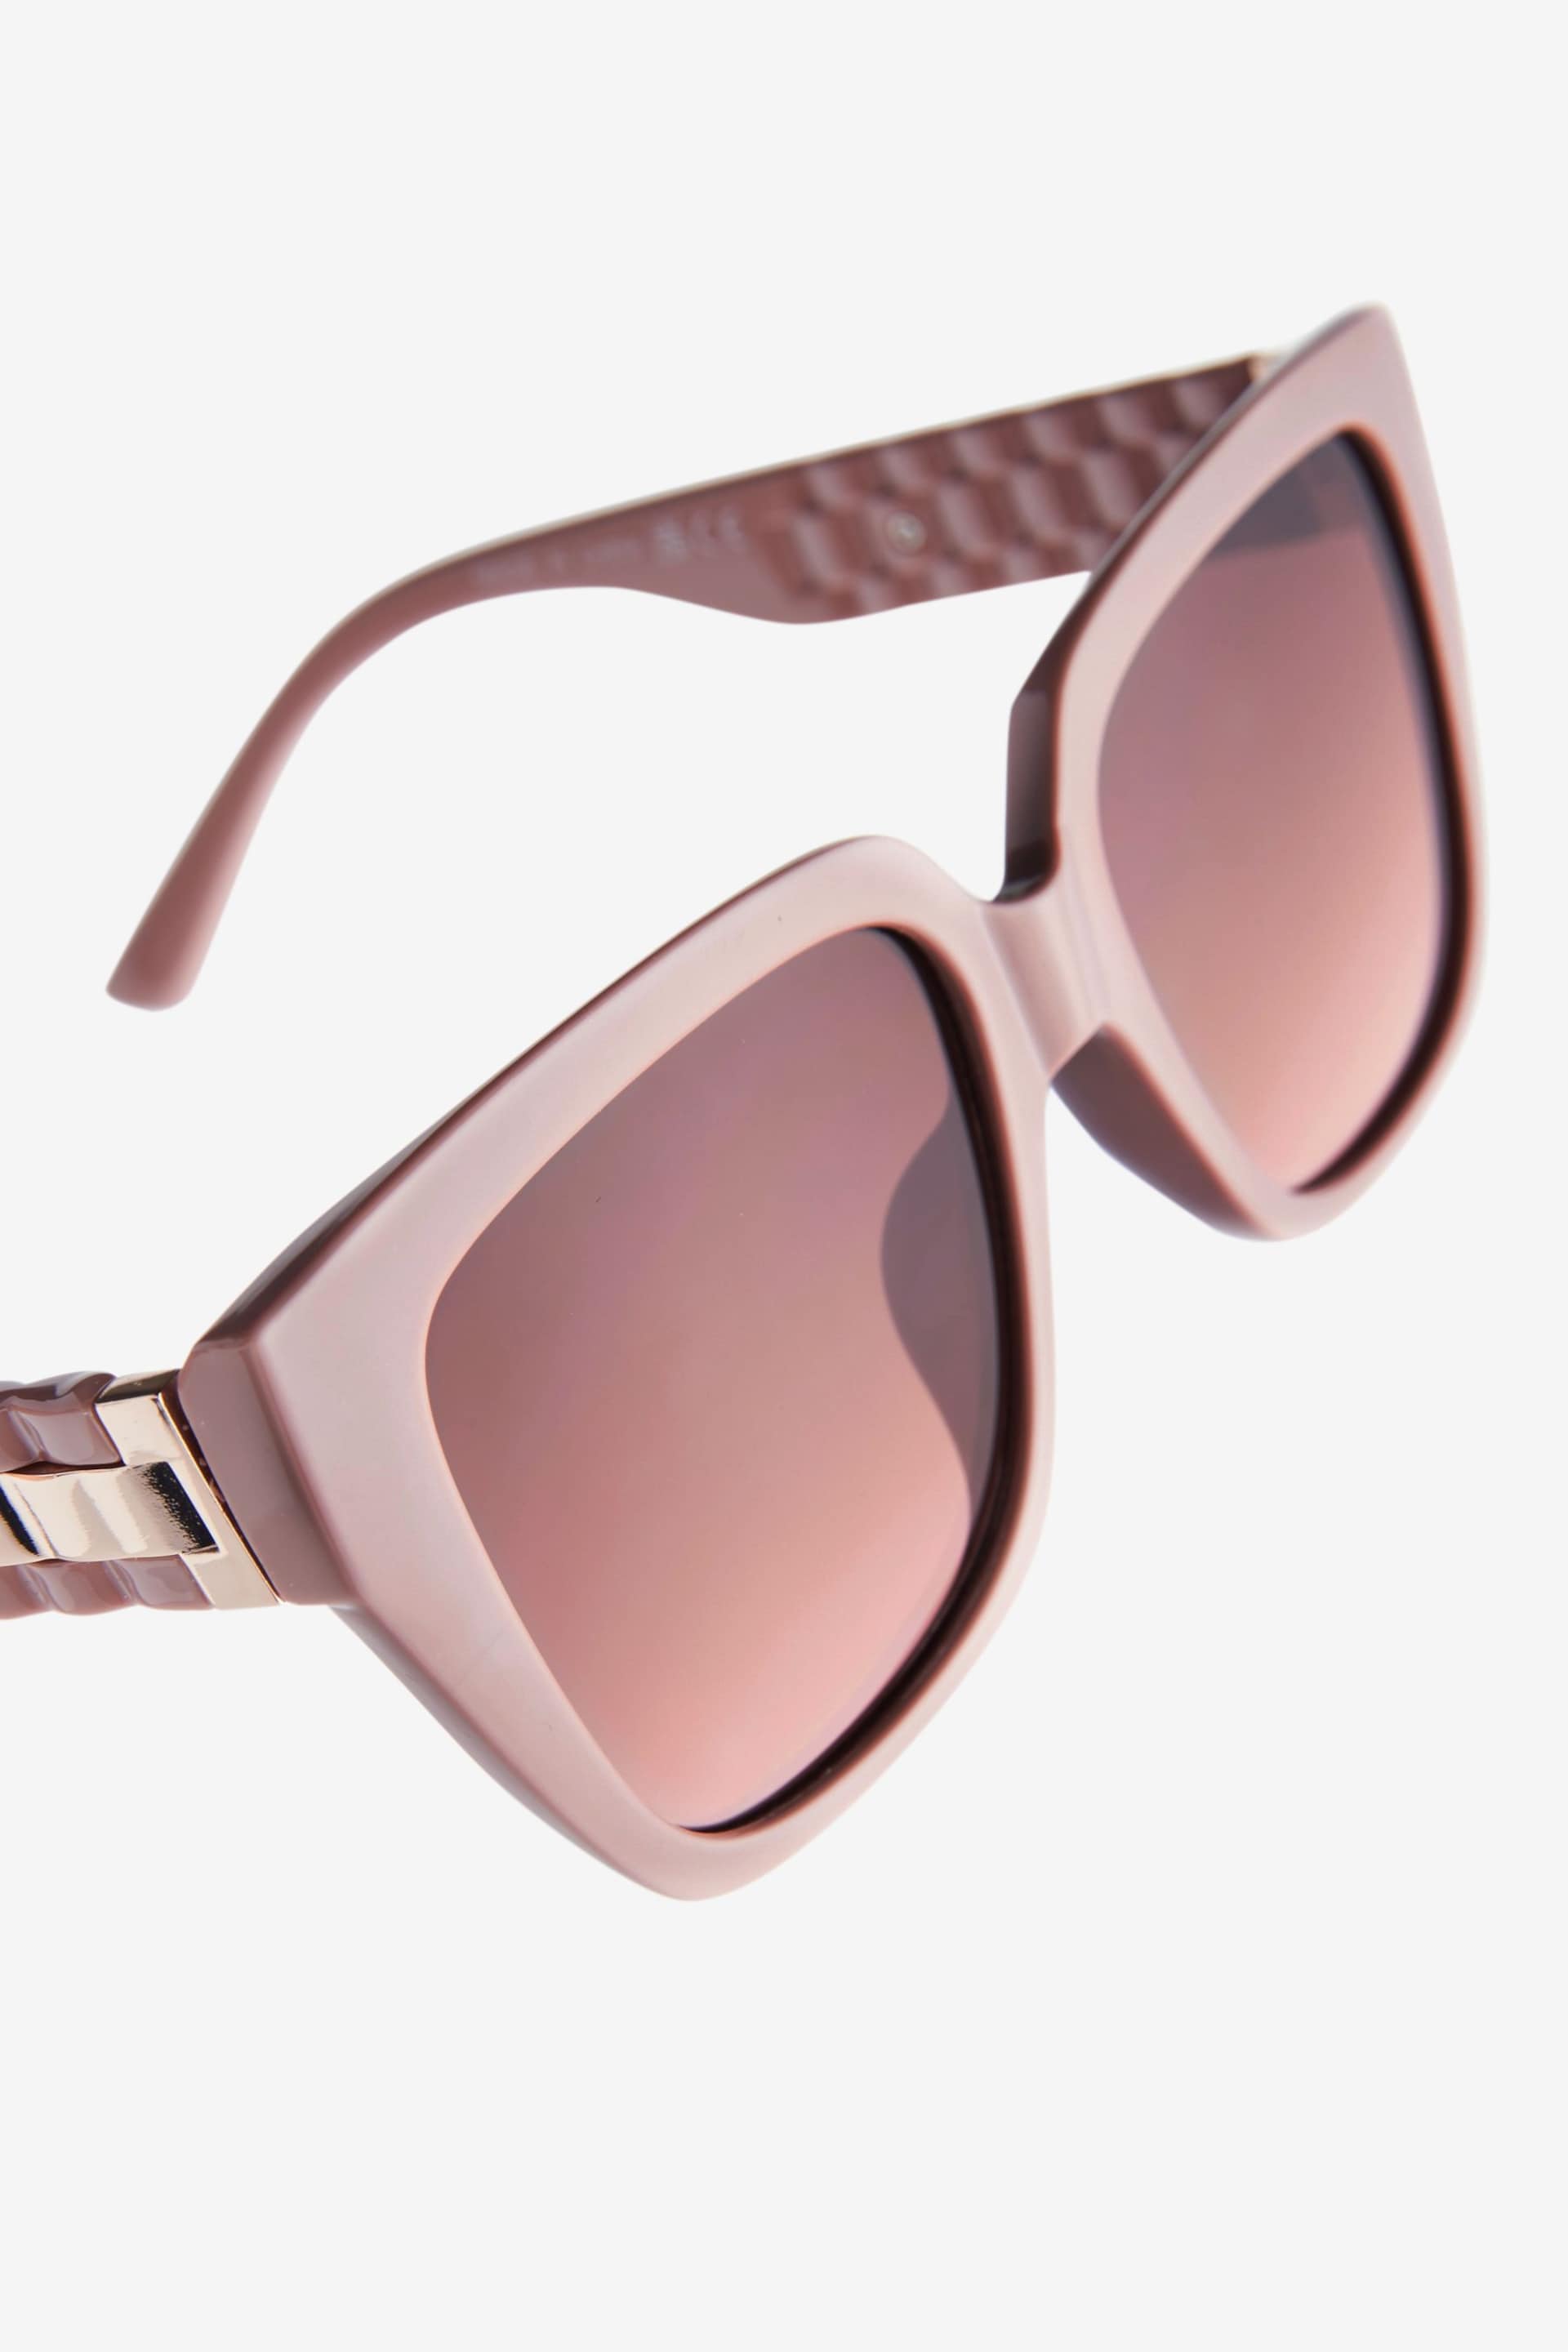 Mink Brown Square Sunglasses - Image 6 of 6